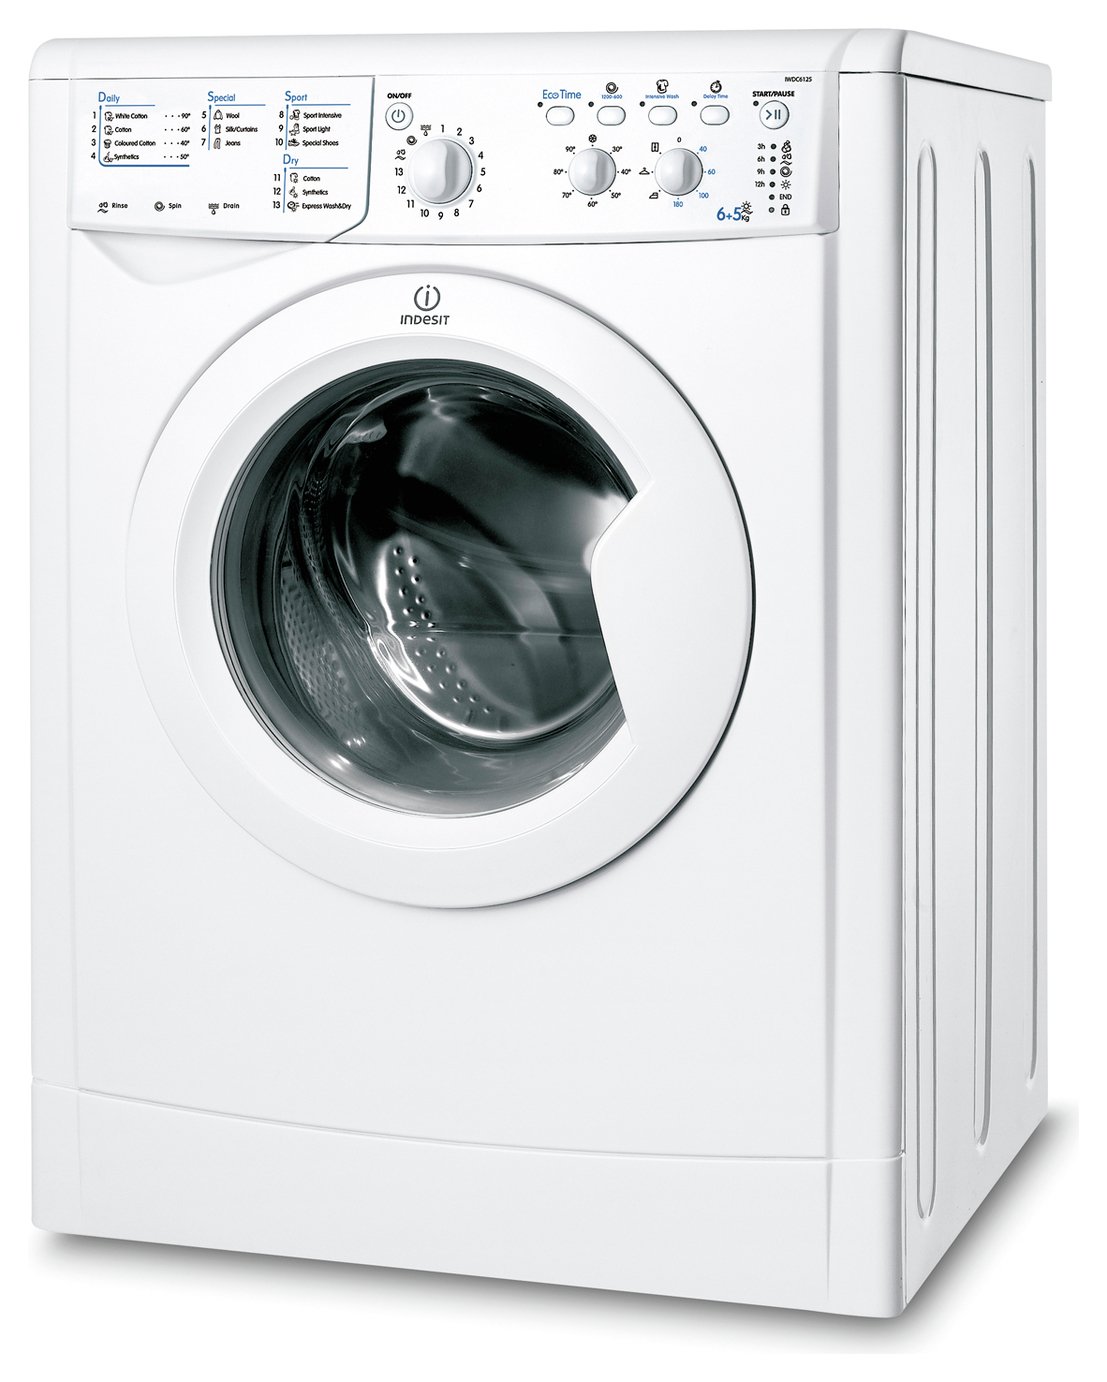 Indesit IWDC6125 6/5KG Washer Dryer Review